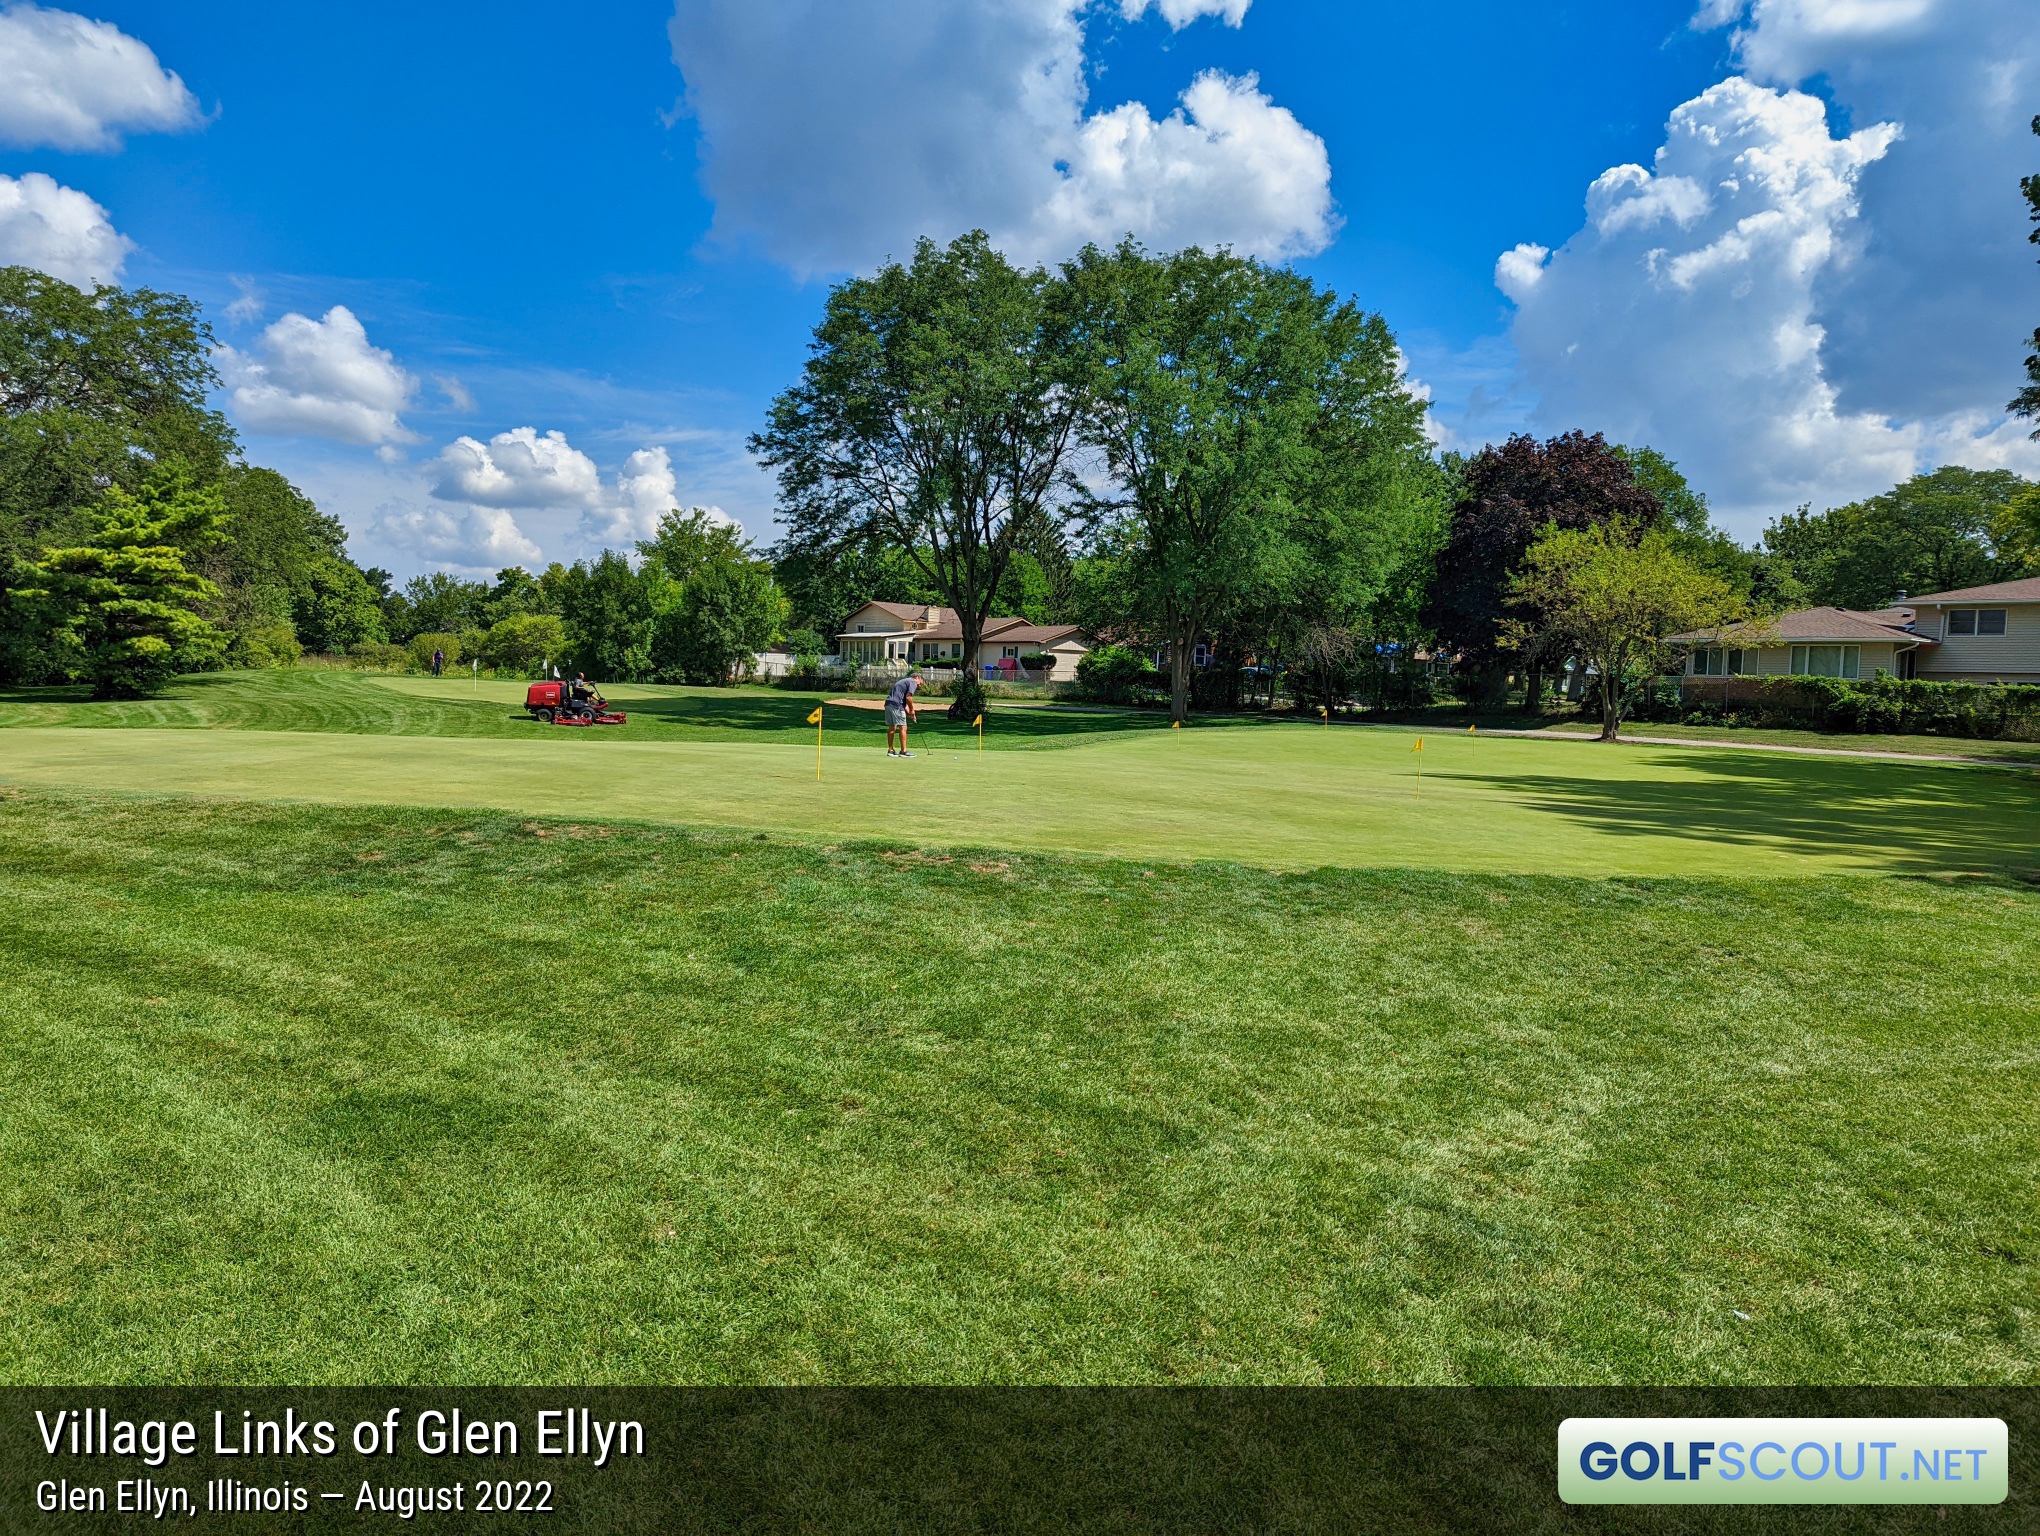 Photo of the practice area at Village Links of Glen Ellyn - 9 Hole Course in Glen Ellyn, Illinois. 